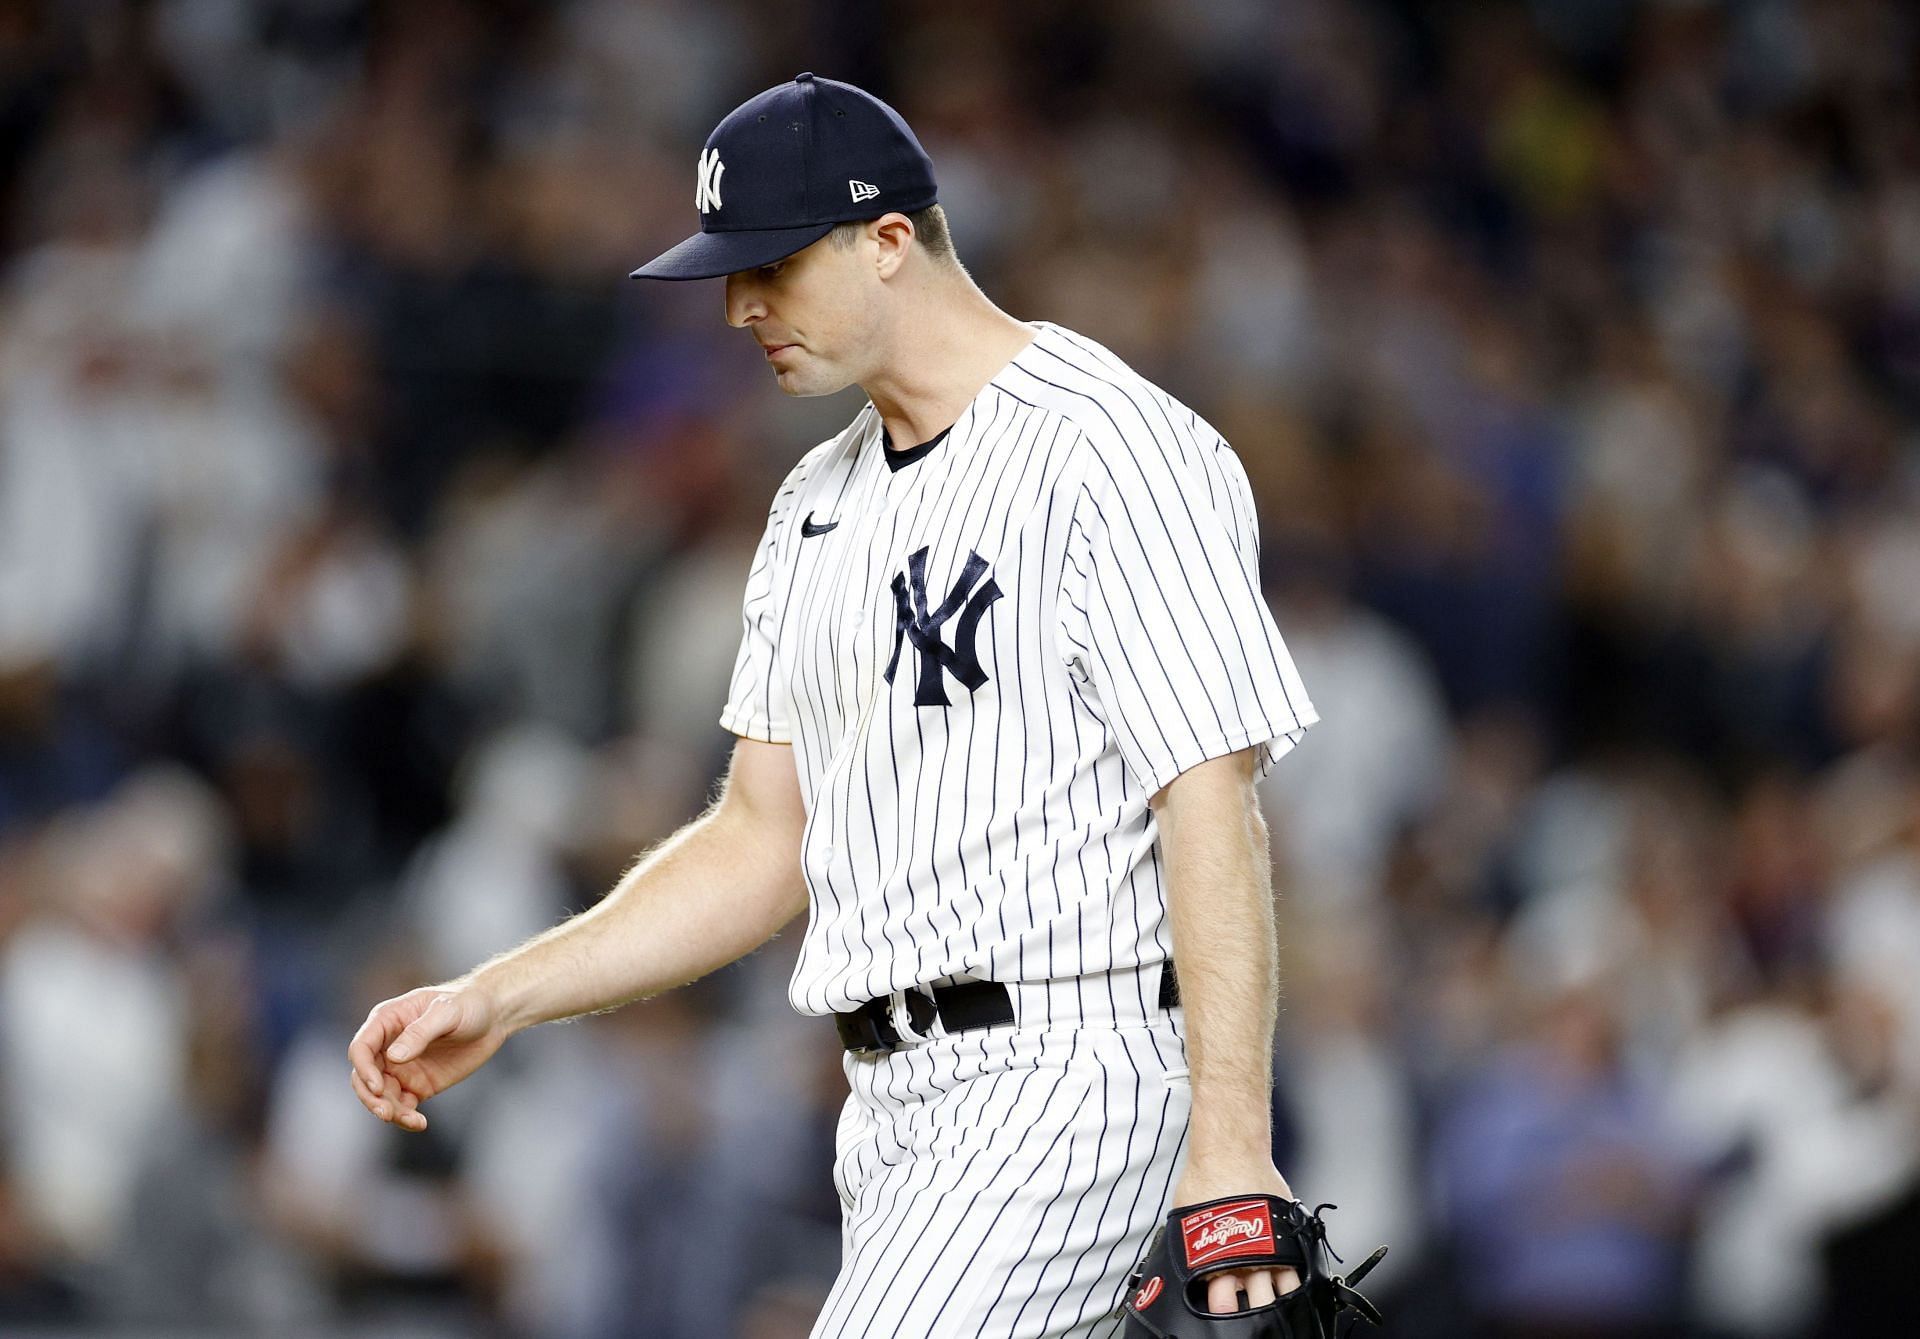 Clay Holmes said he was surprised that he was not used tonight. He said his  arm is fine - All-Star reliever insists he was ready after baffling  decision by Yankees manager Aaron